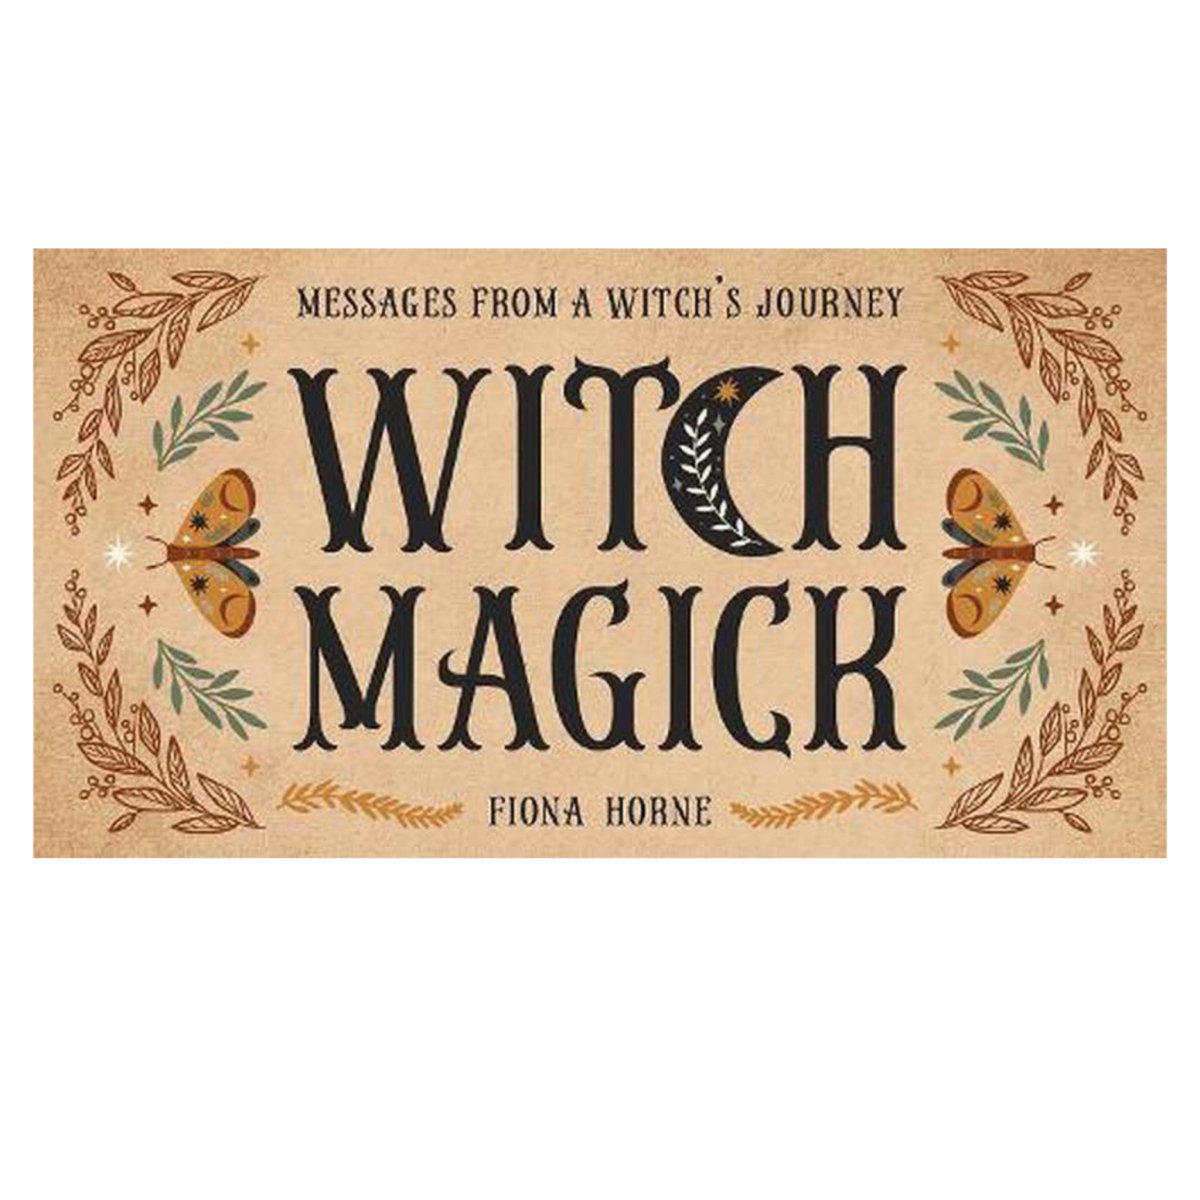 Witch Magick: Messages from a witch's journey - Fiona Horne - Astrology House